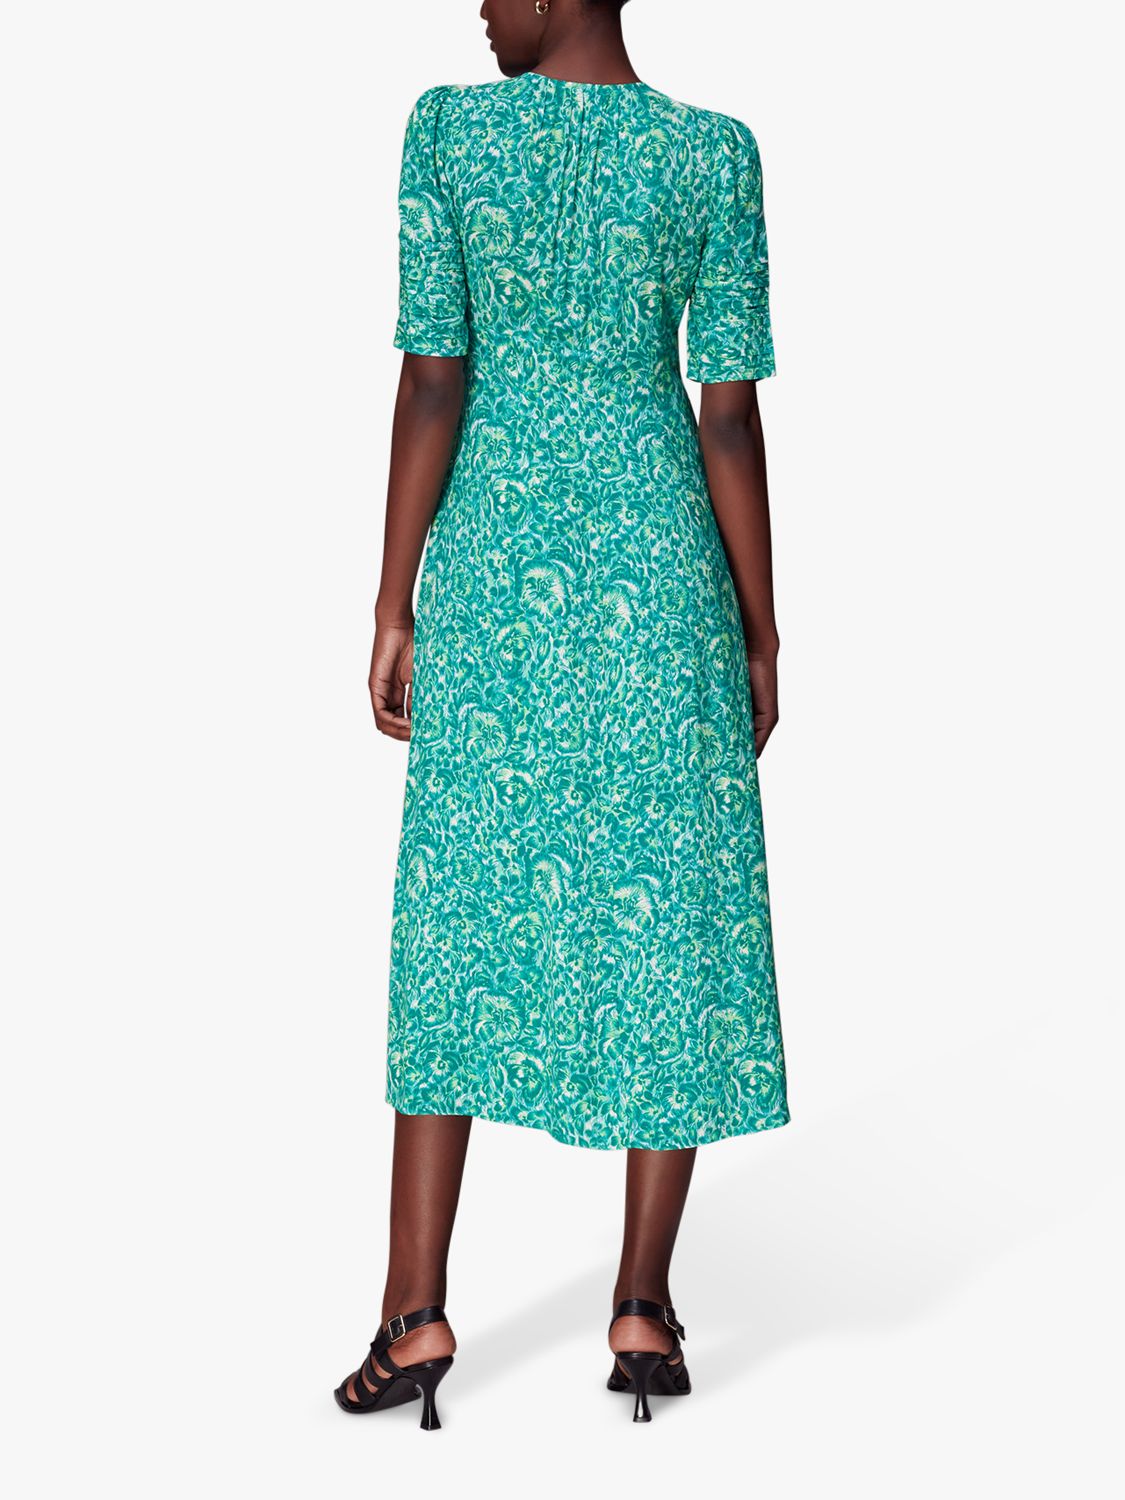 Whistles Clouded Floral Tie Midi Dress, Green/Multi at John Lewis ...